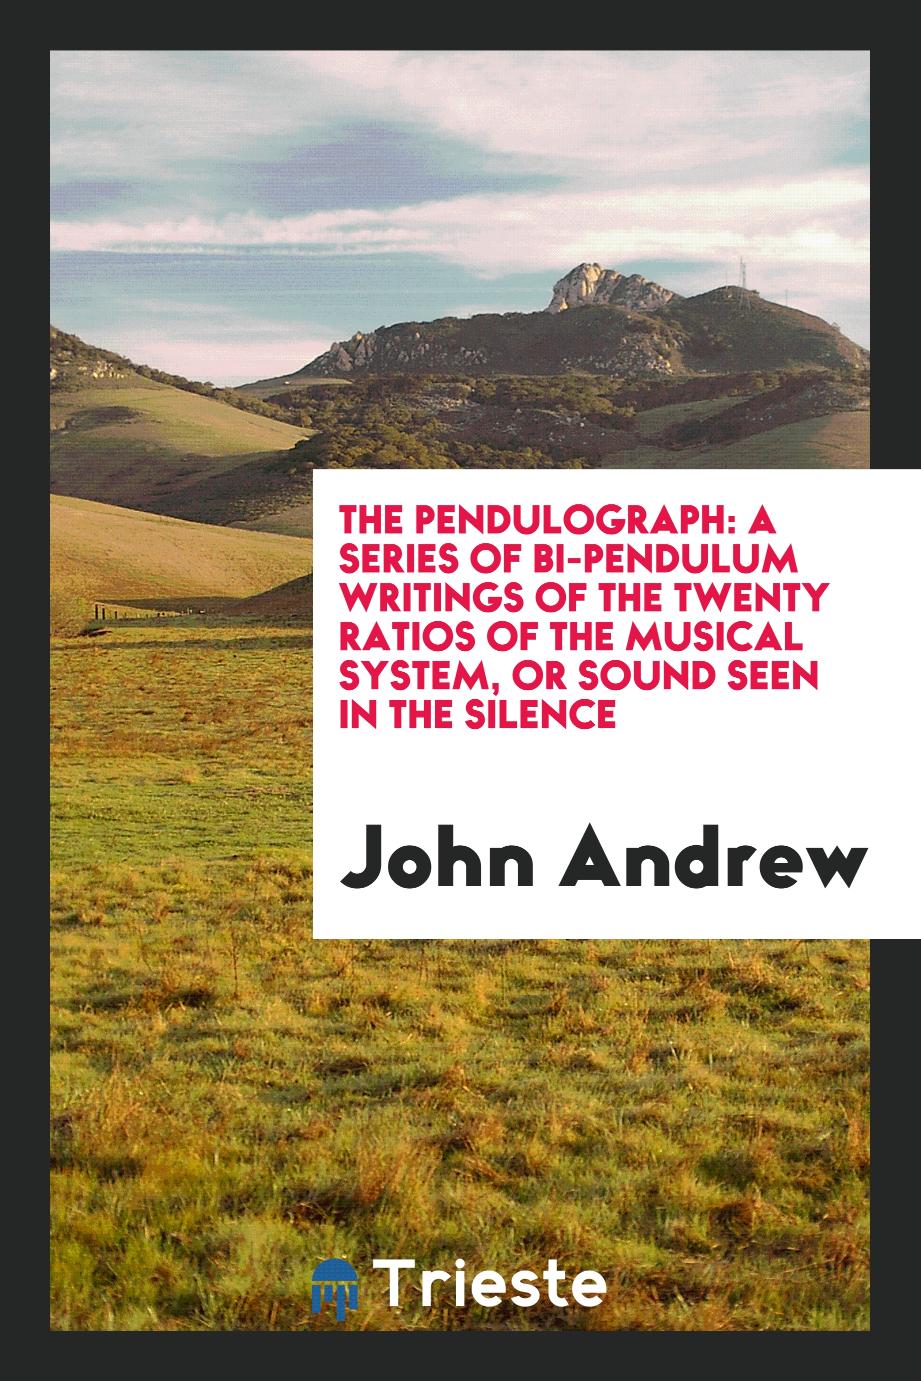 The pendulograph: a series of bi-pendulum writings of the twenty ratios of the musical system, or sound seen in the silence